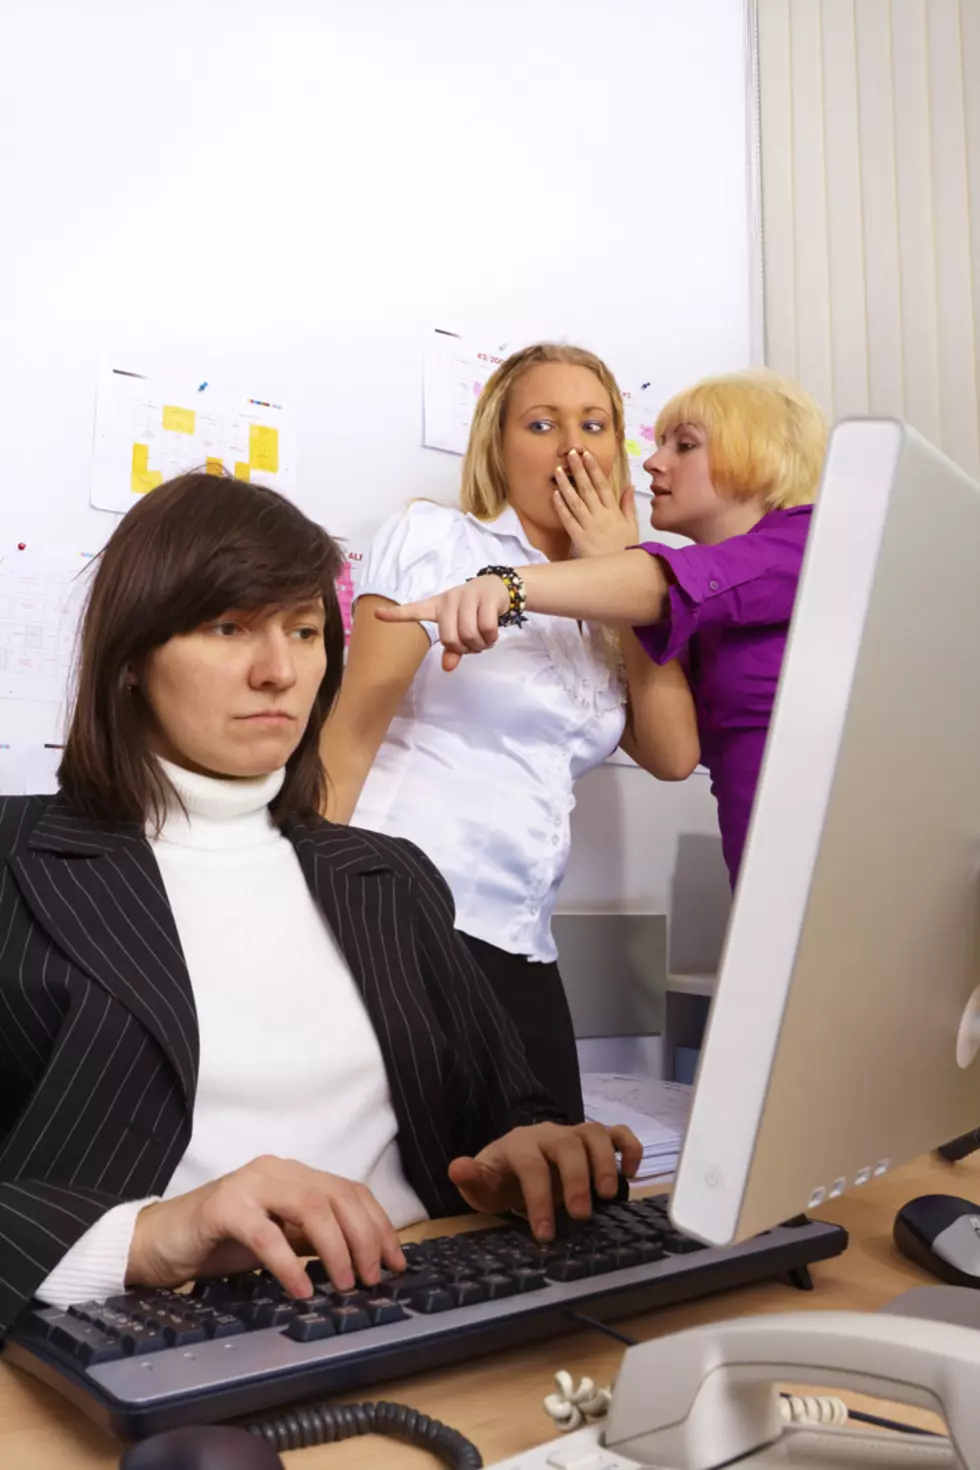 Here’s your Chance, It’s National Slap Your Annoying Coworker Day